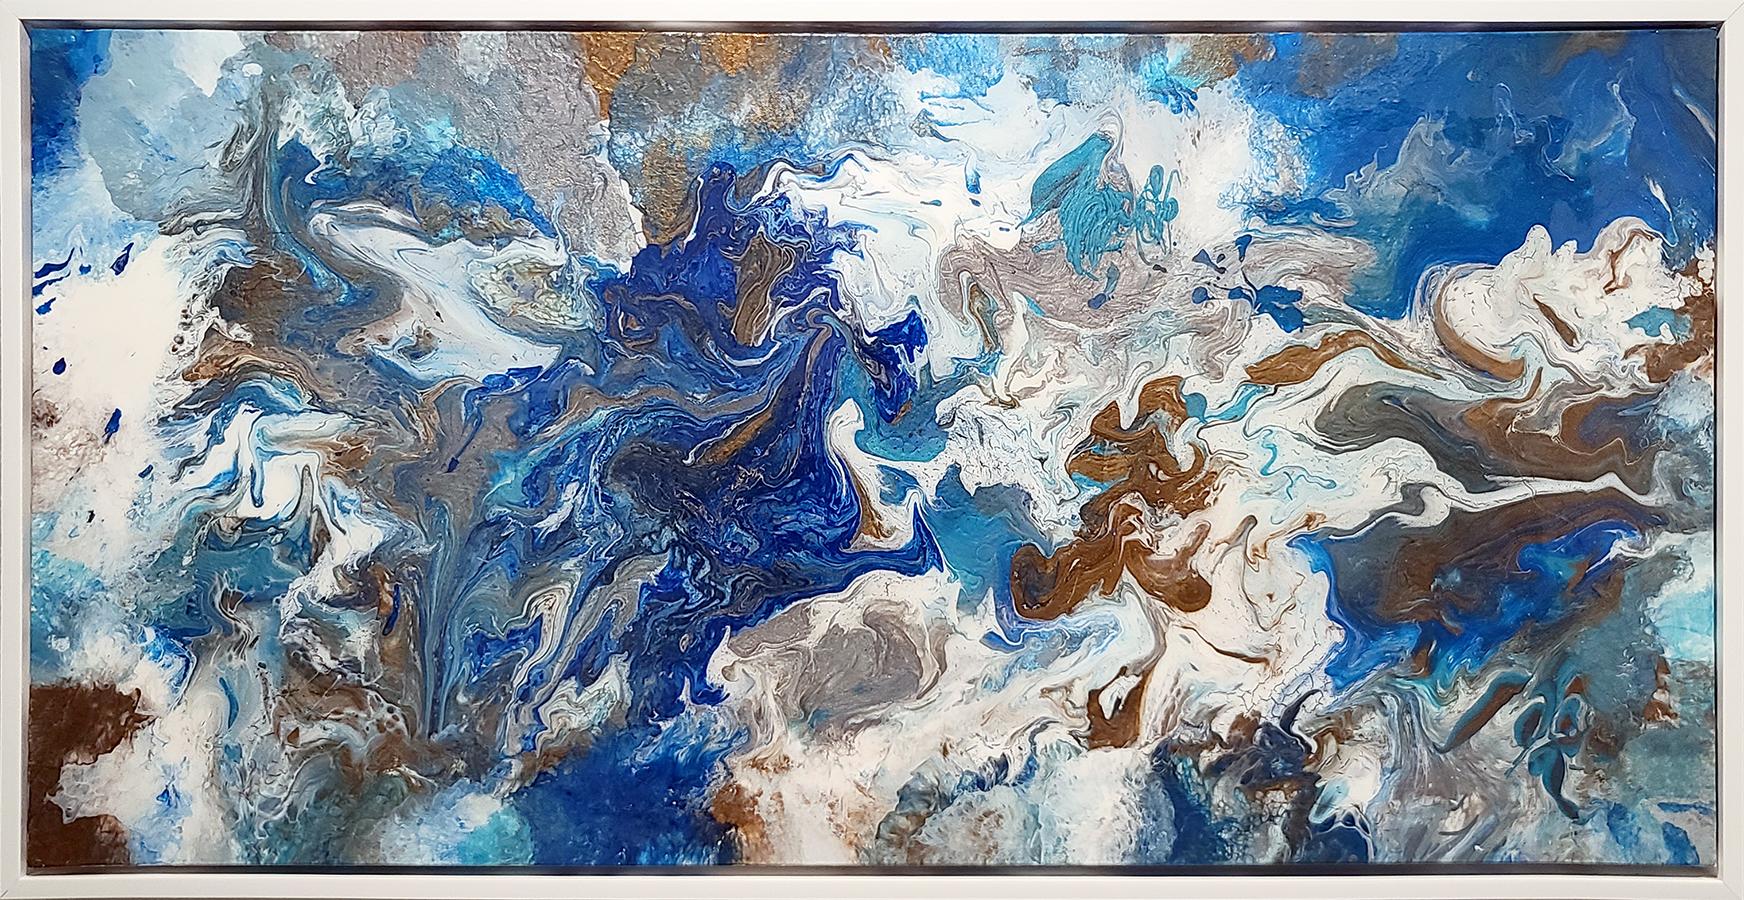 Nickol Renae Abstract Painting - "Coastal Clarity"  24x48 Acrylic and Resin on canvas